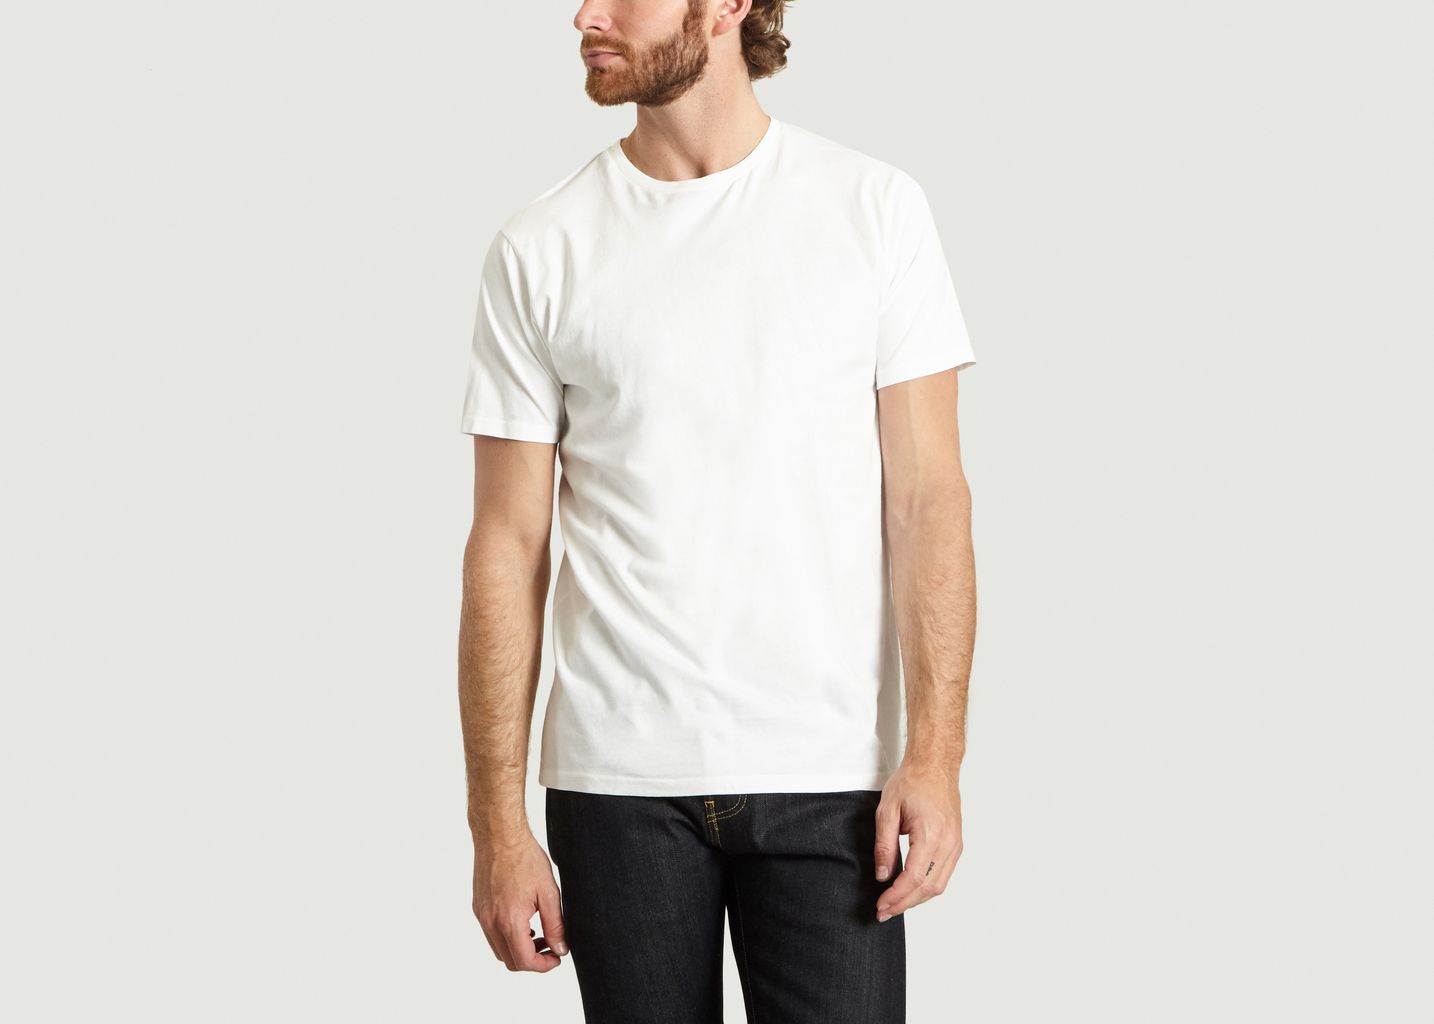 Colorful Standard White Classic T Shirt